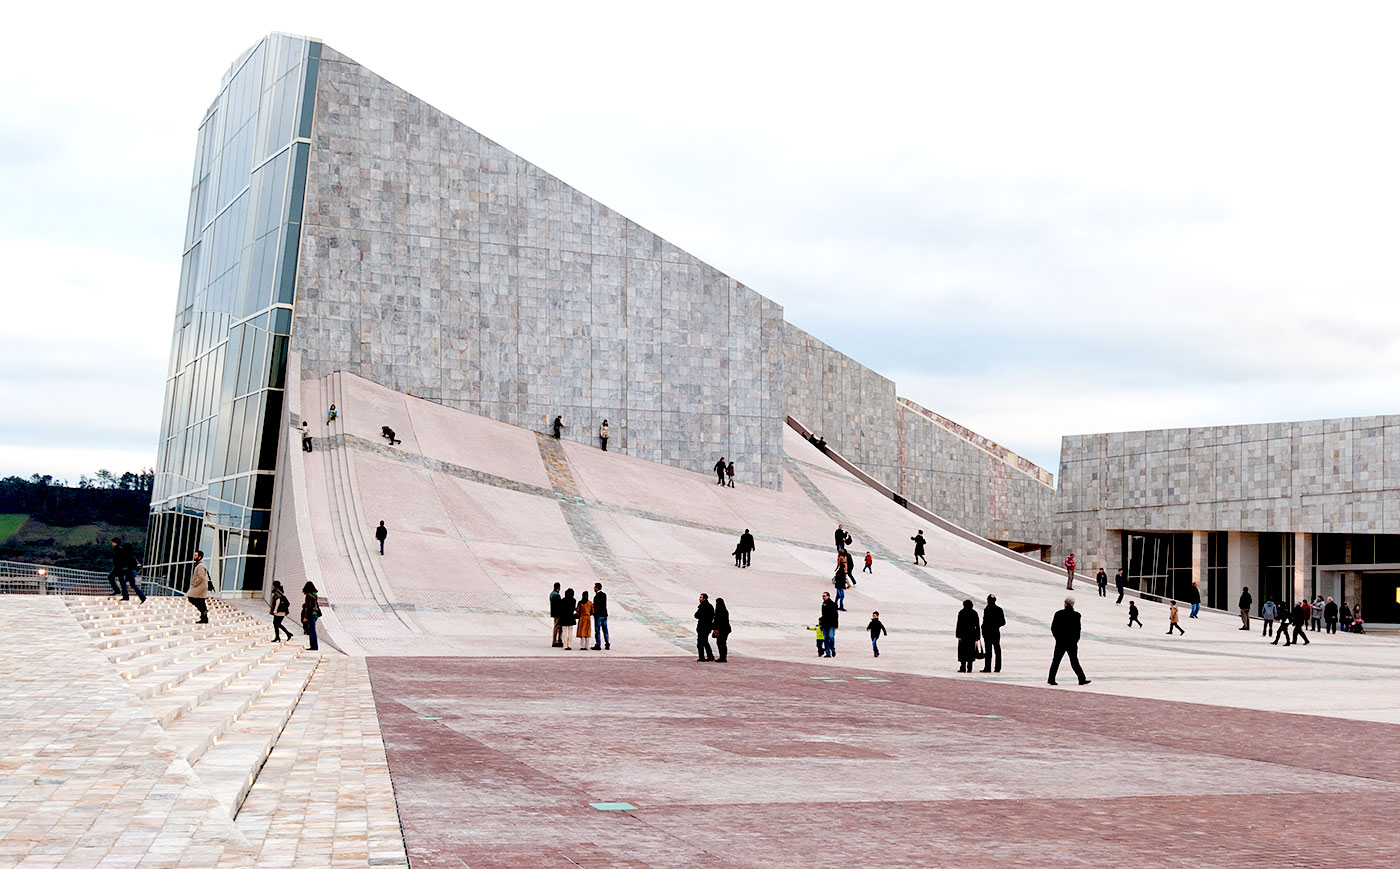 City of Culture of Galicia by Eisenman Architects. Photo: Courtesy of Eisenman Architects